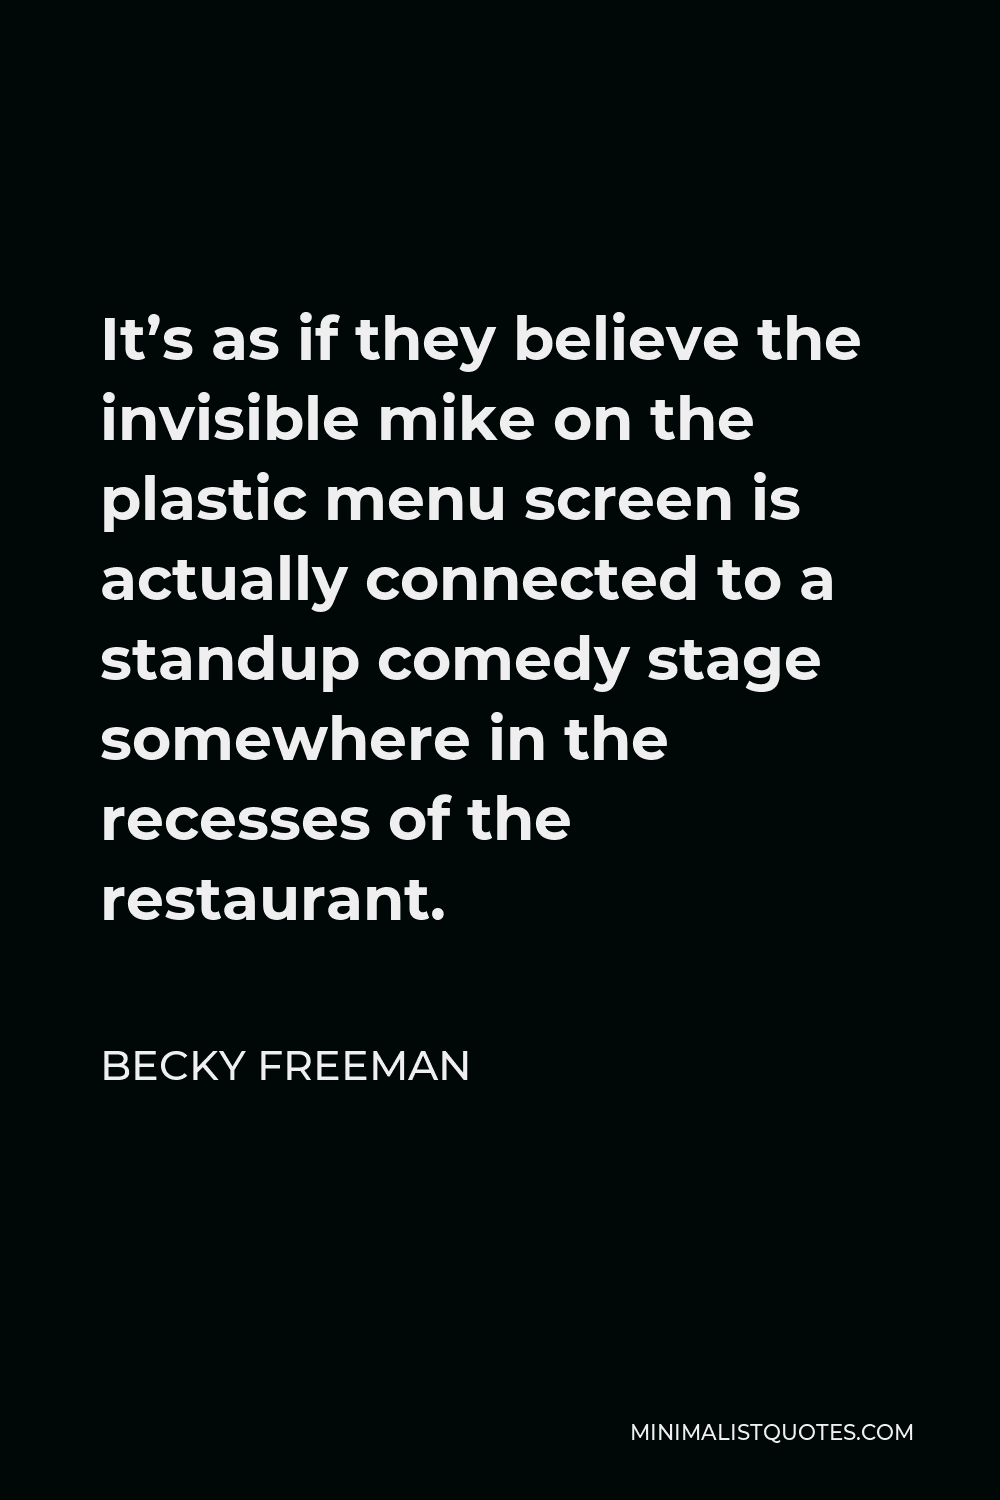 Becky Freeman Quote - It’s as if they believe the invisible mike on the plastic menu screen is actually connected to a standup comedy stage somewhere in the recesses of the restaurant.